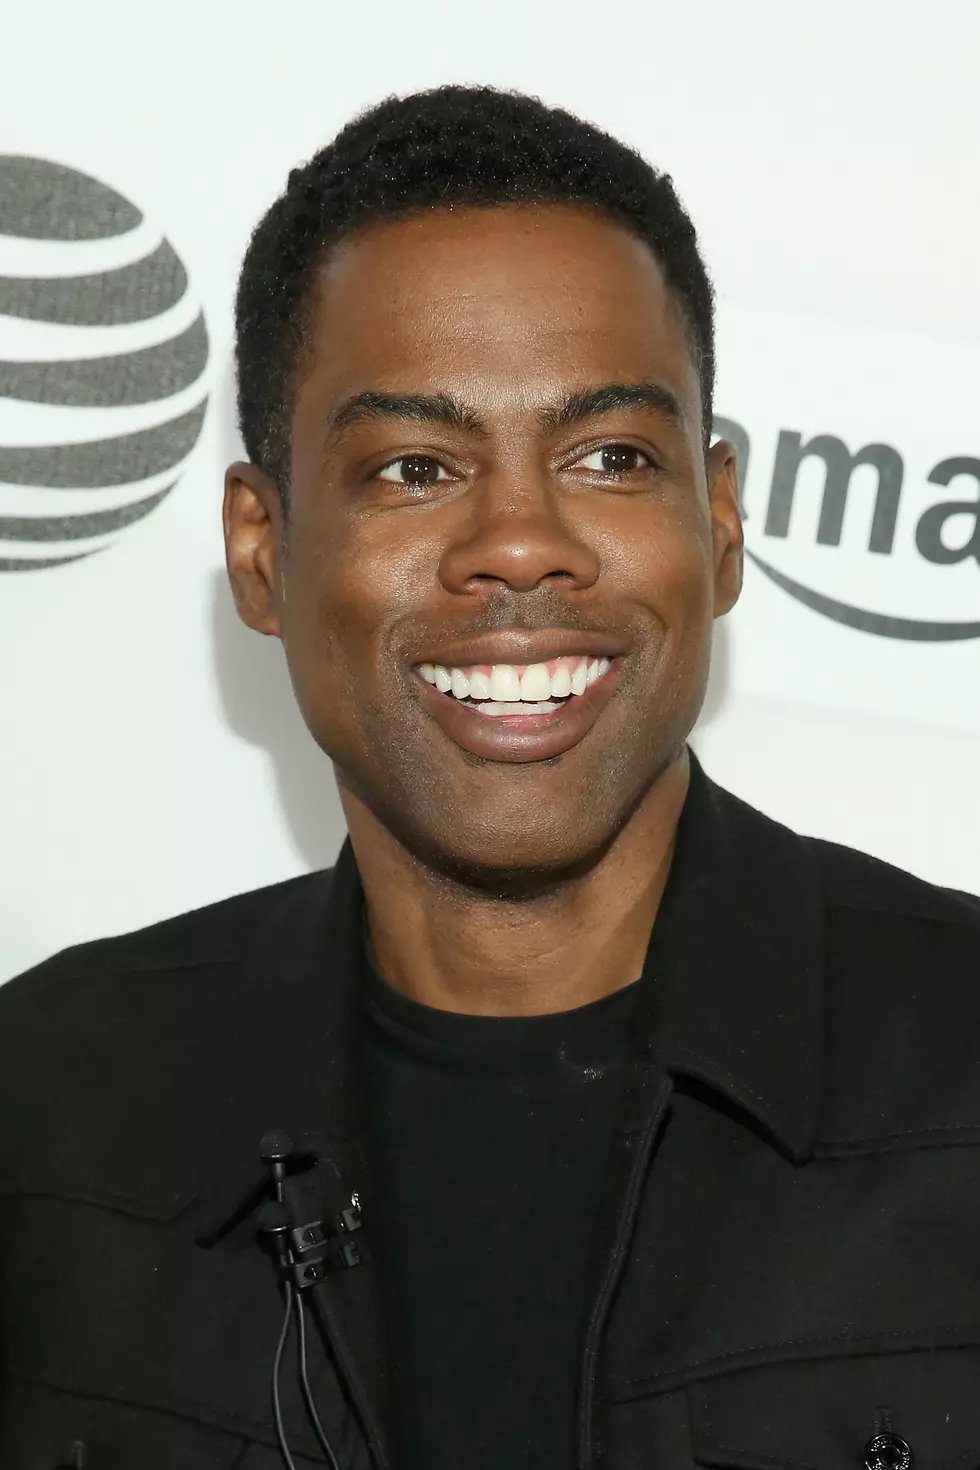 Chris Rock is Going on Tour and He’s Making a Stop in Minnesota